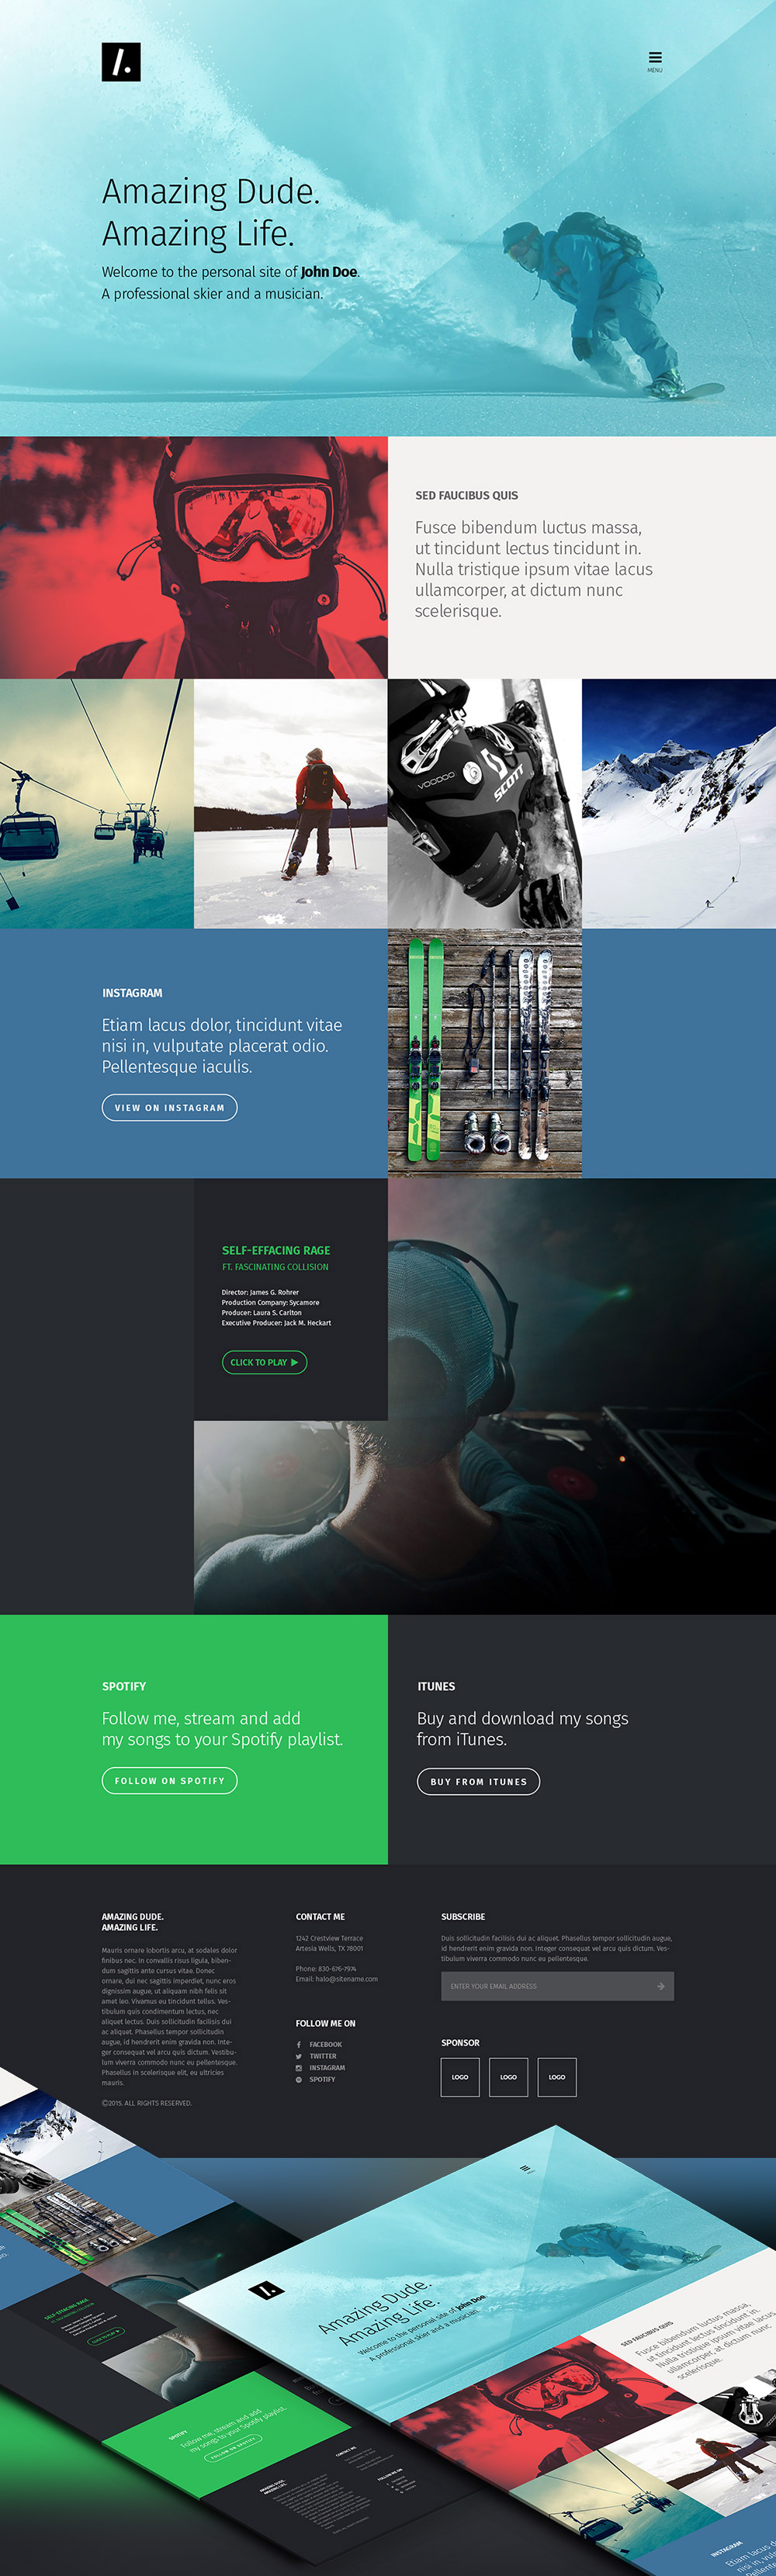 One Page Personal Portfolio Website Template Free PSD Download PSD